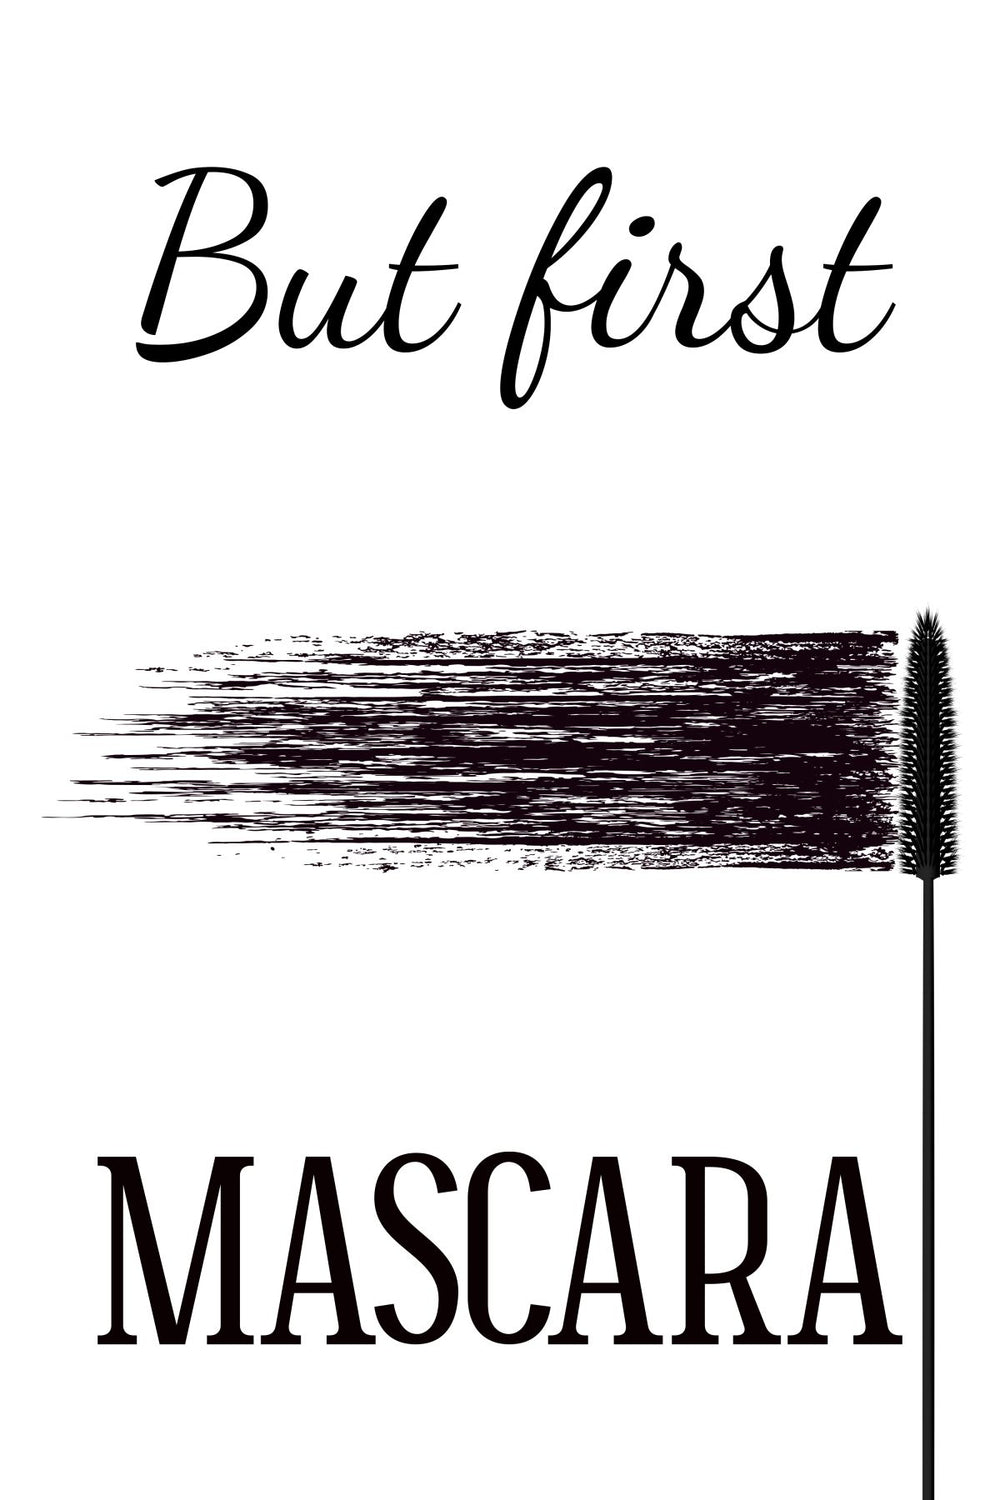 Mascara First Typography